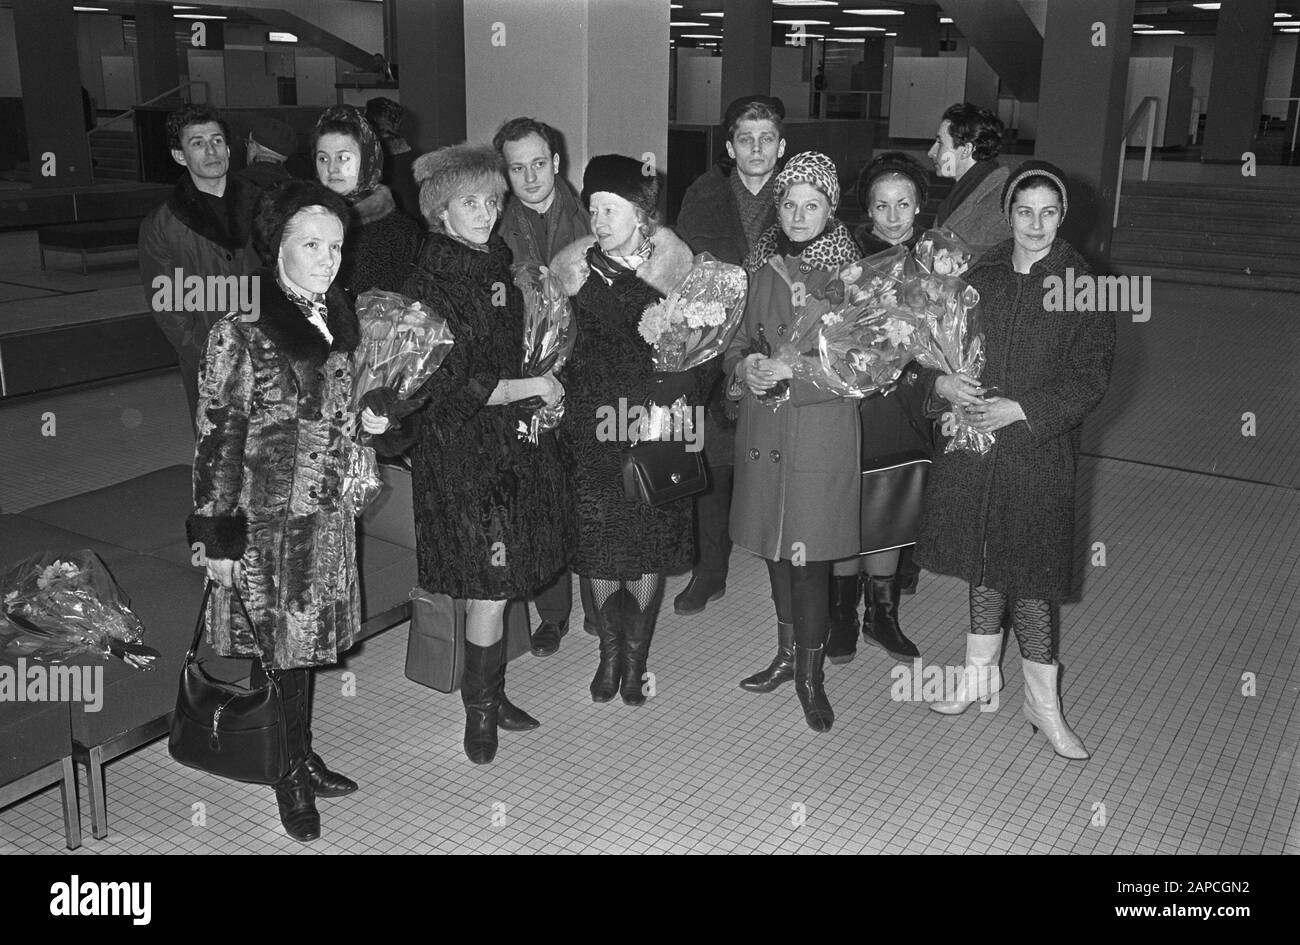 Arrival Russian topballet at Schiphol, number 14 Galina Ulanova, number 15, 16 and 17 the whole group Date: February 5, 1968 Location: Noord-Holland, Schiphol Keywords: arrivals, ballet Stock Photo